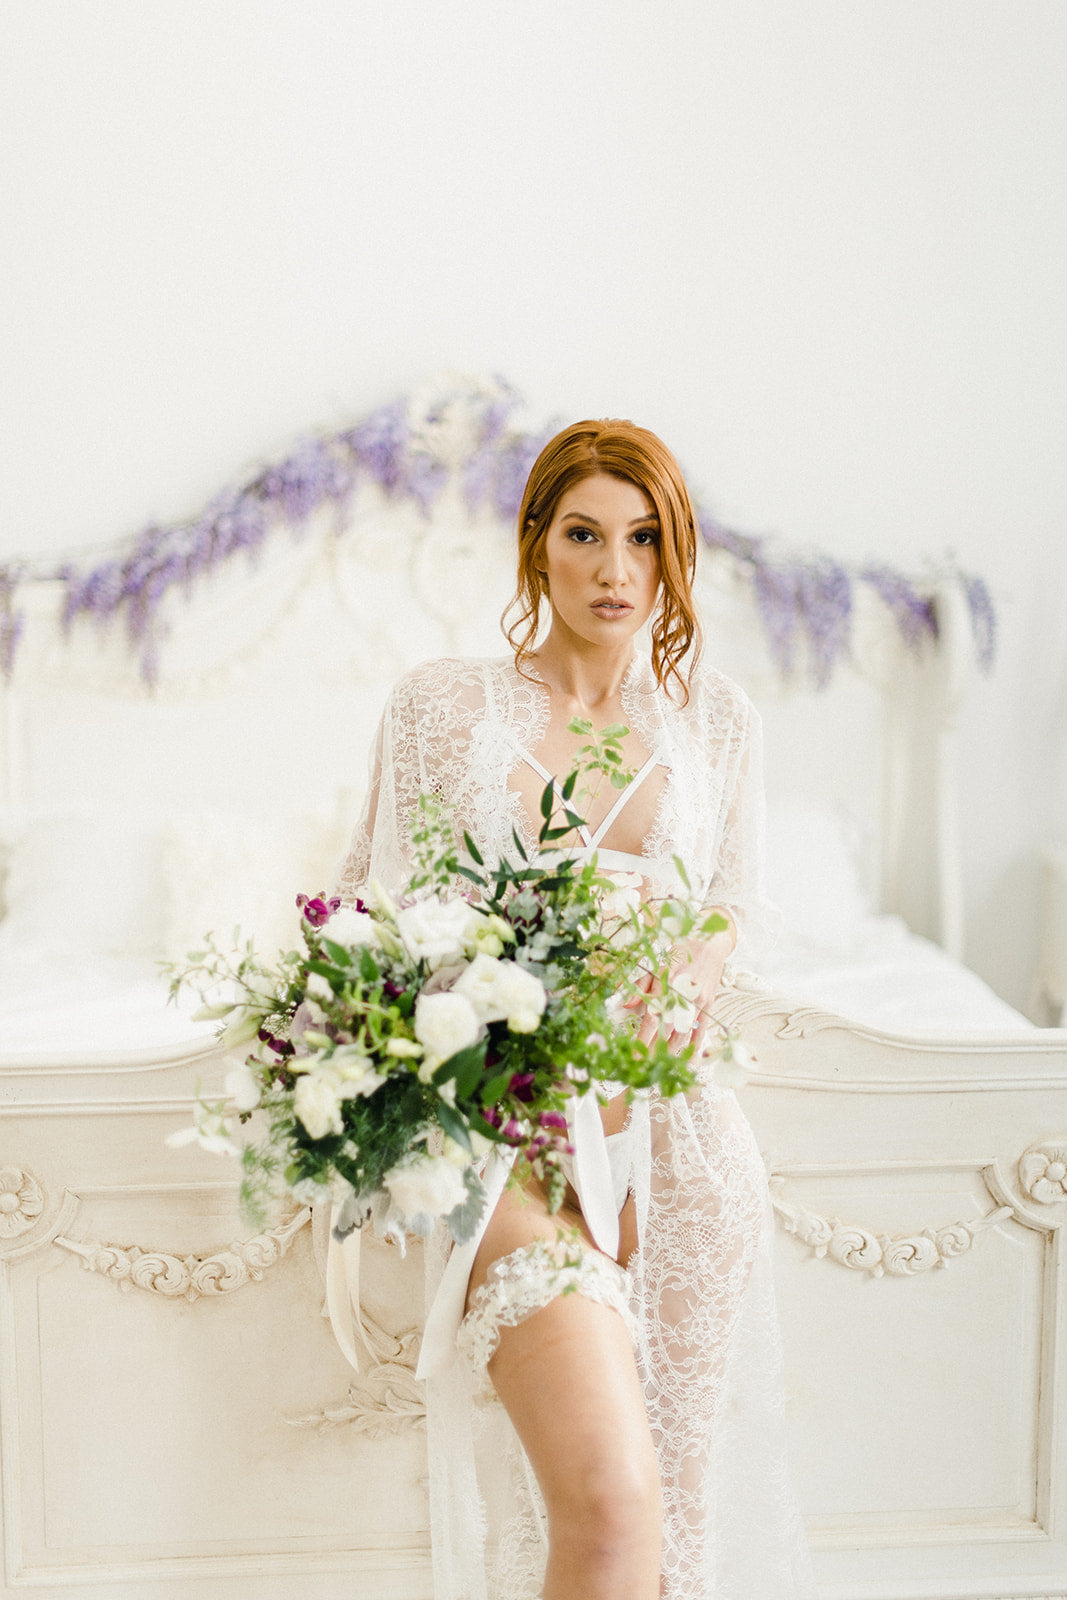 Bridal Boudoir Session with Flowers